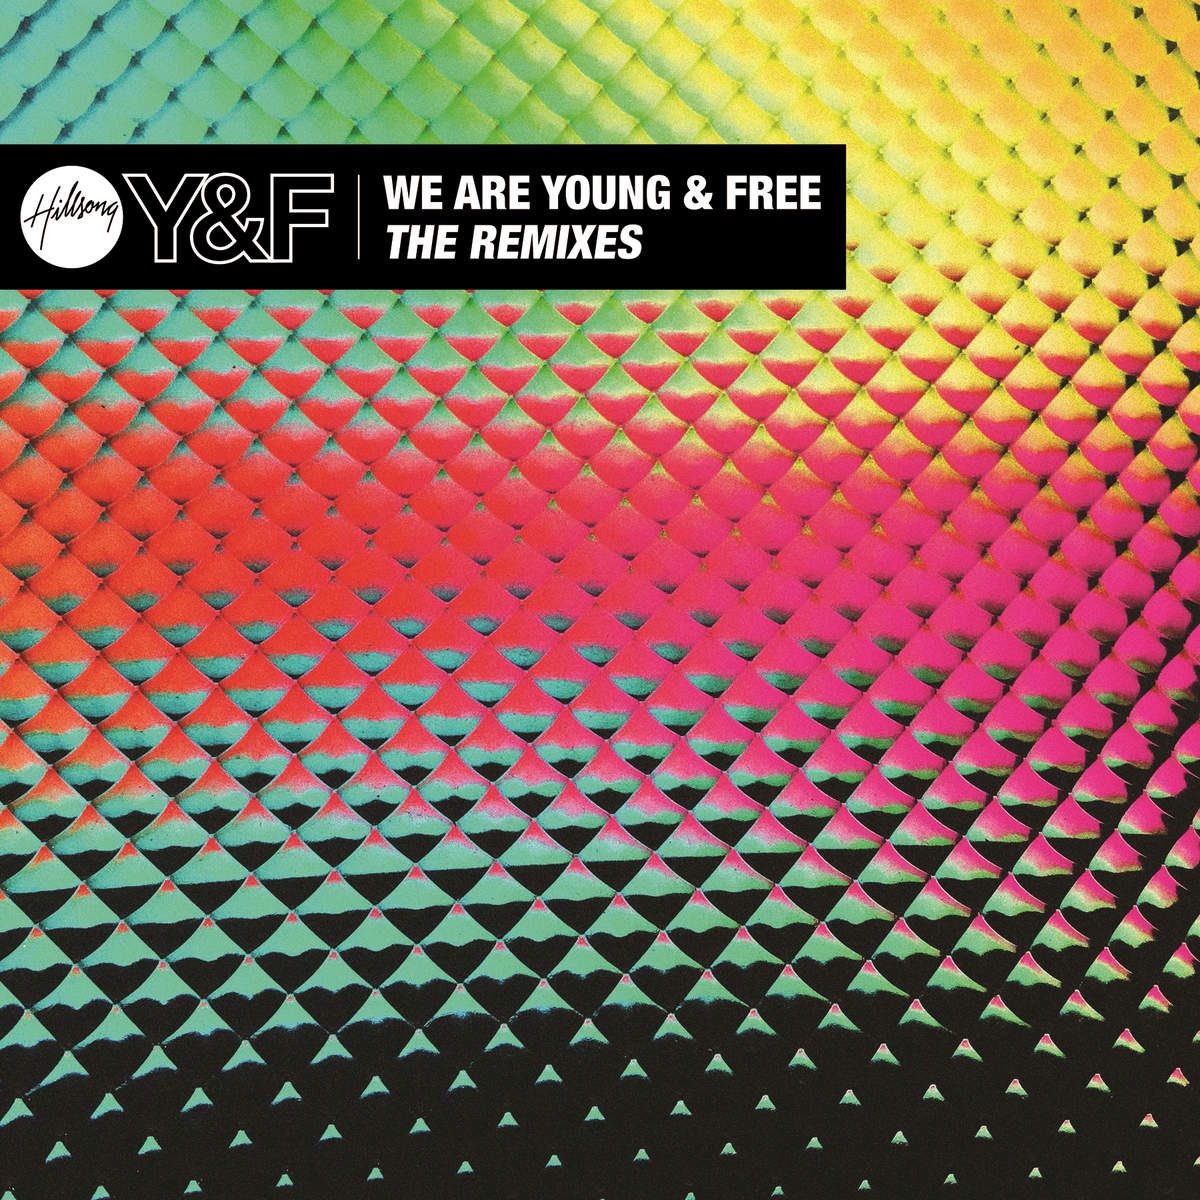 We Are Young & Free (The Remixes)